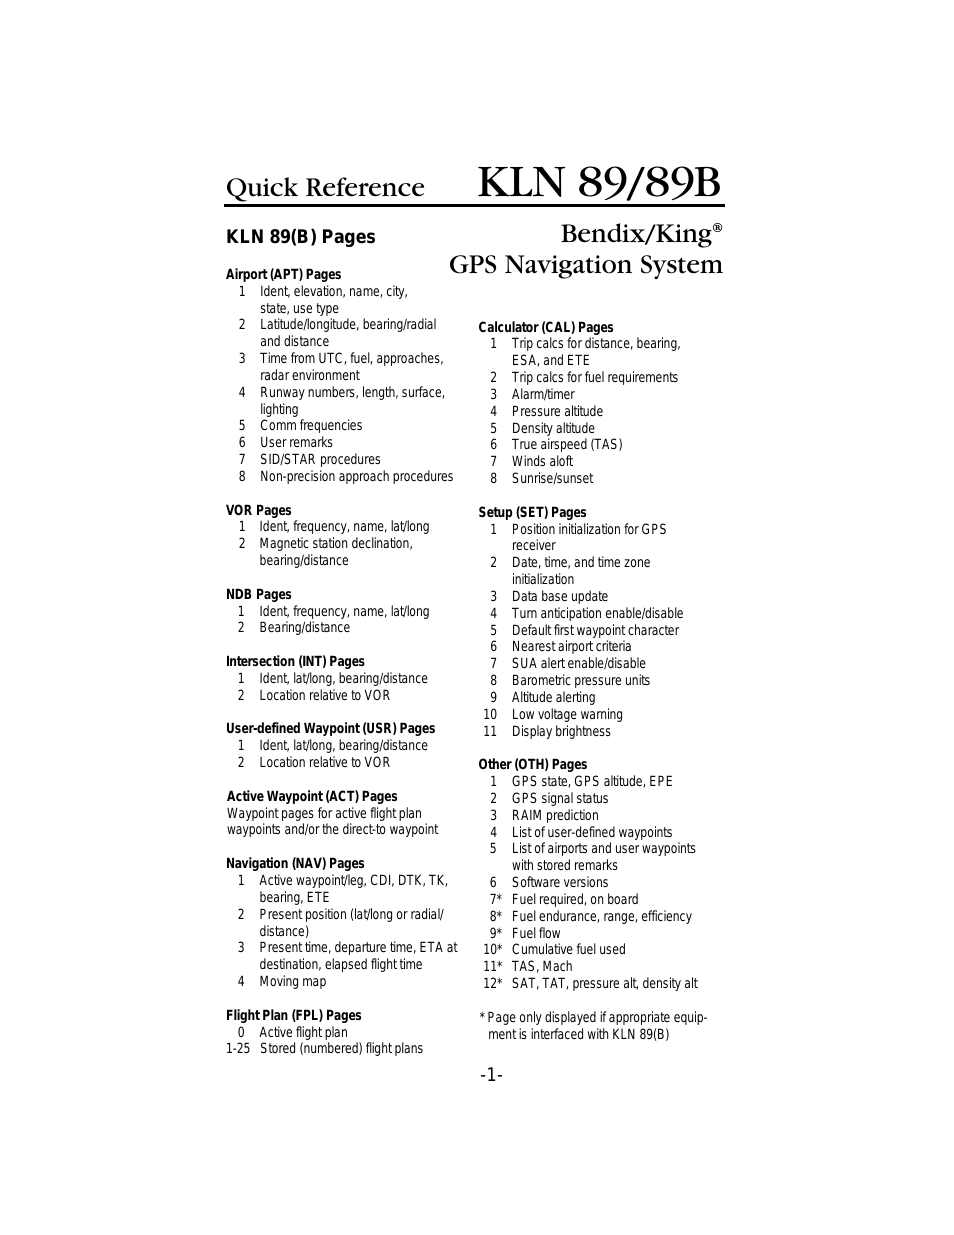 KLN 89B - Quick Reference Guide